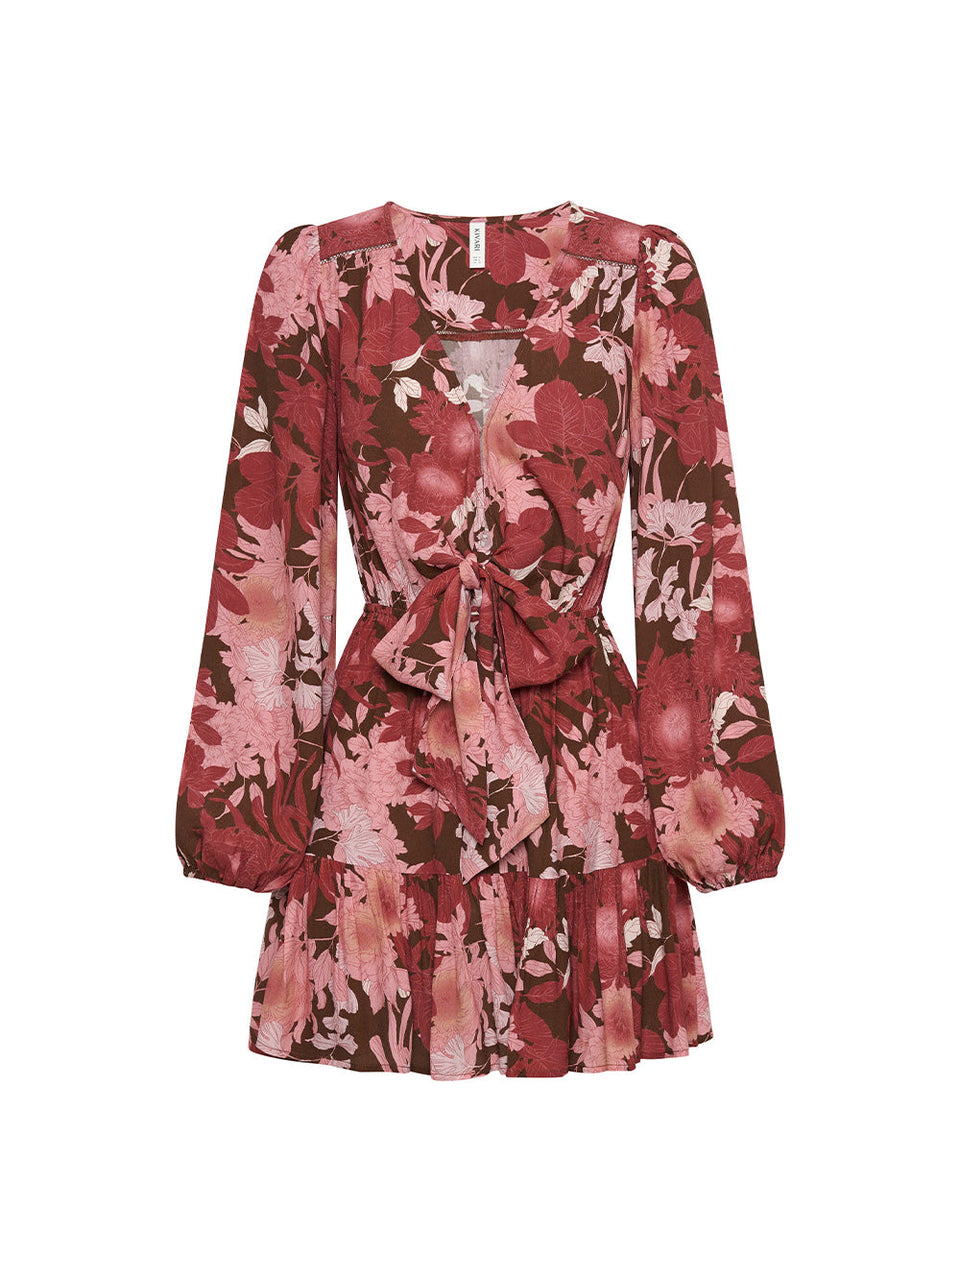 Ghost image:  KIVARI Hacienda Tie Front Mini Dress: A red, pink and brown floral dress crafted from sustainable LENZING Viscose Crepe featuring full-length sleeves, a tiered skirt and a soft ribboned tie.